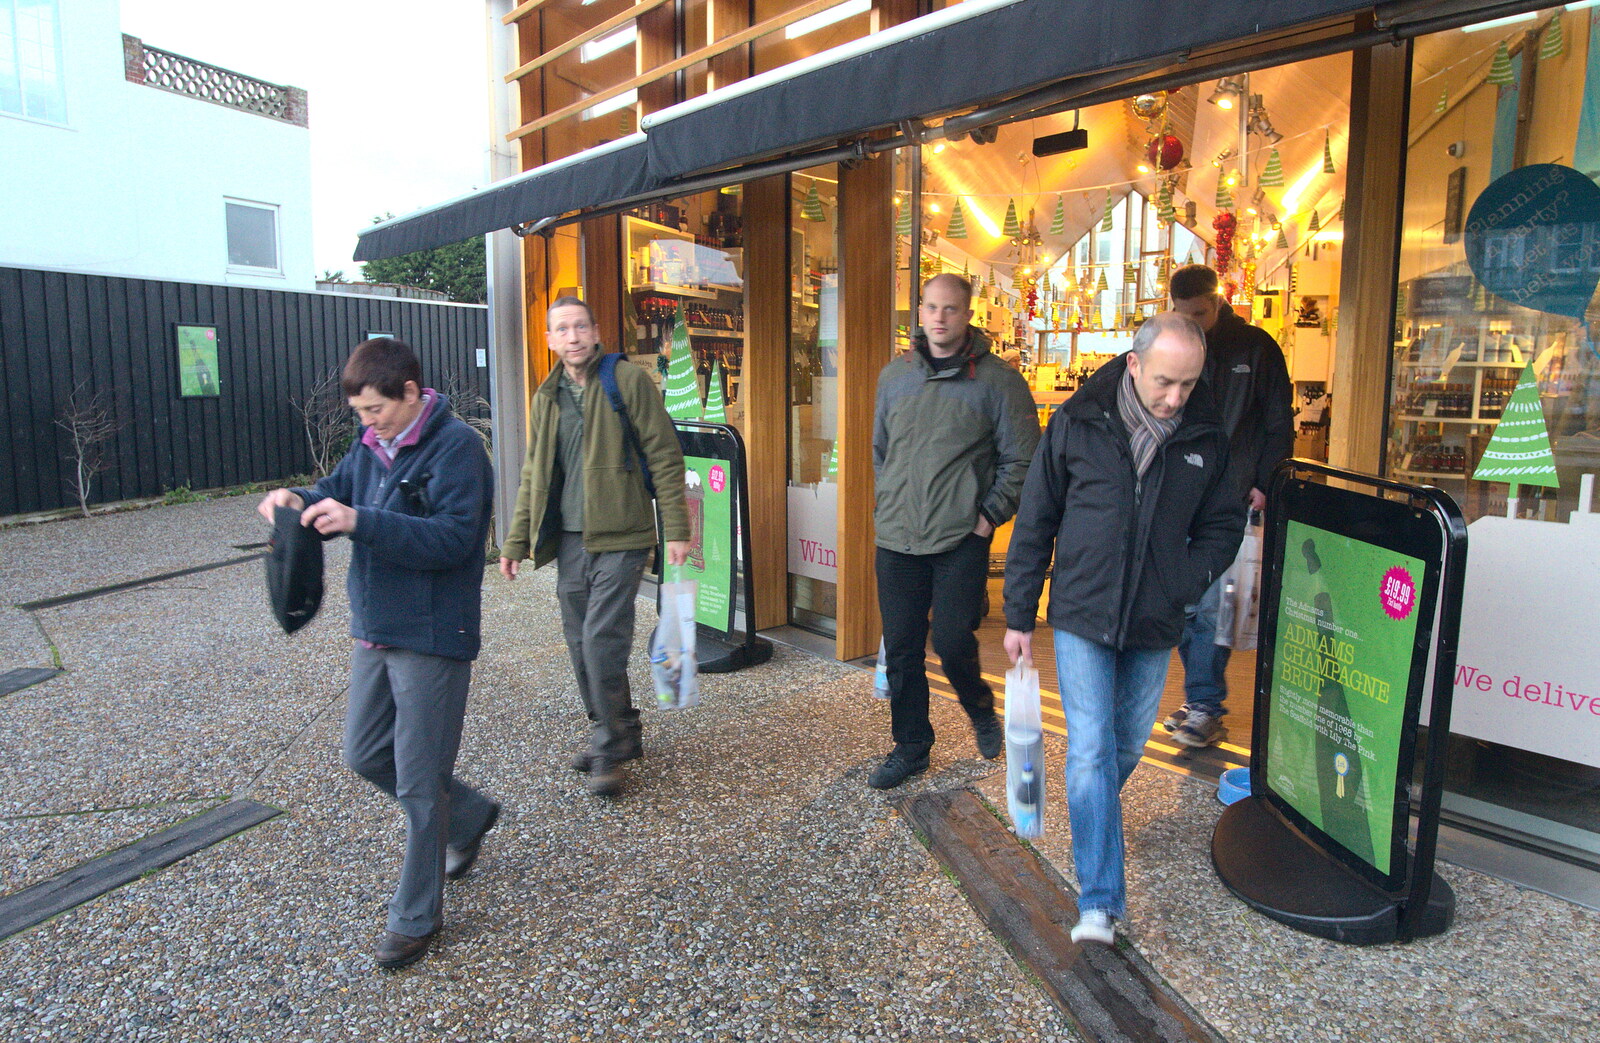 The gang spill out of the Adnams Kitchen shop from Apple's Adnams Brewery Birthday Tour, Southwold, Suffolk - 29th November 2012